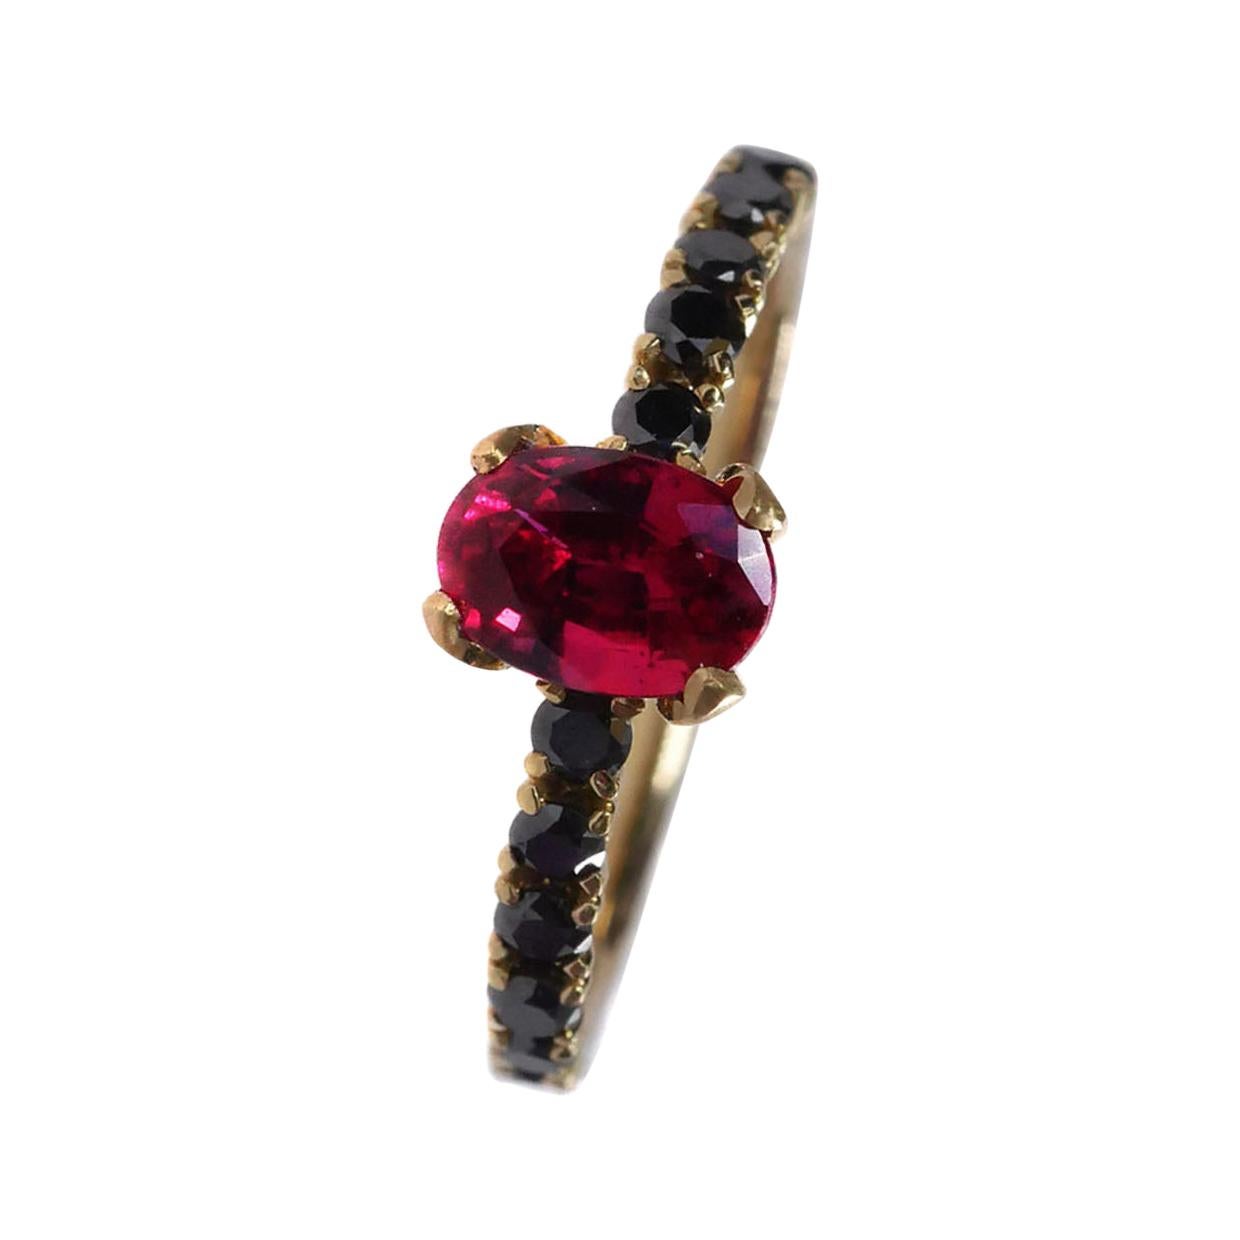 For Sale:  1 Carat Ruby and Black Diamonds Solitaire Ring Set in 18 Karat Yellow Gold